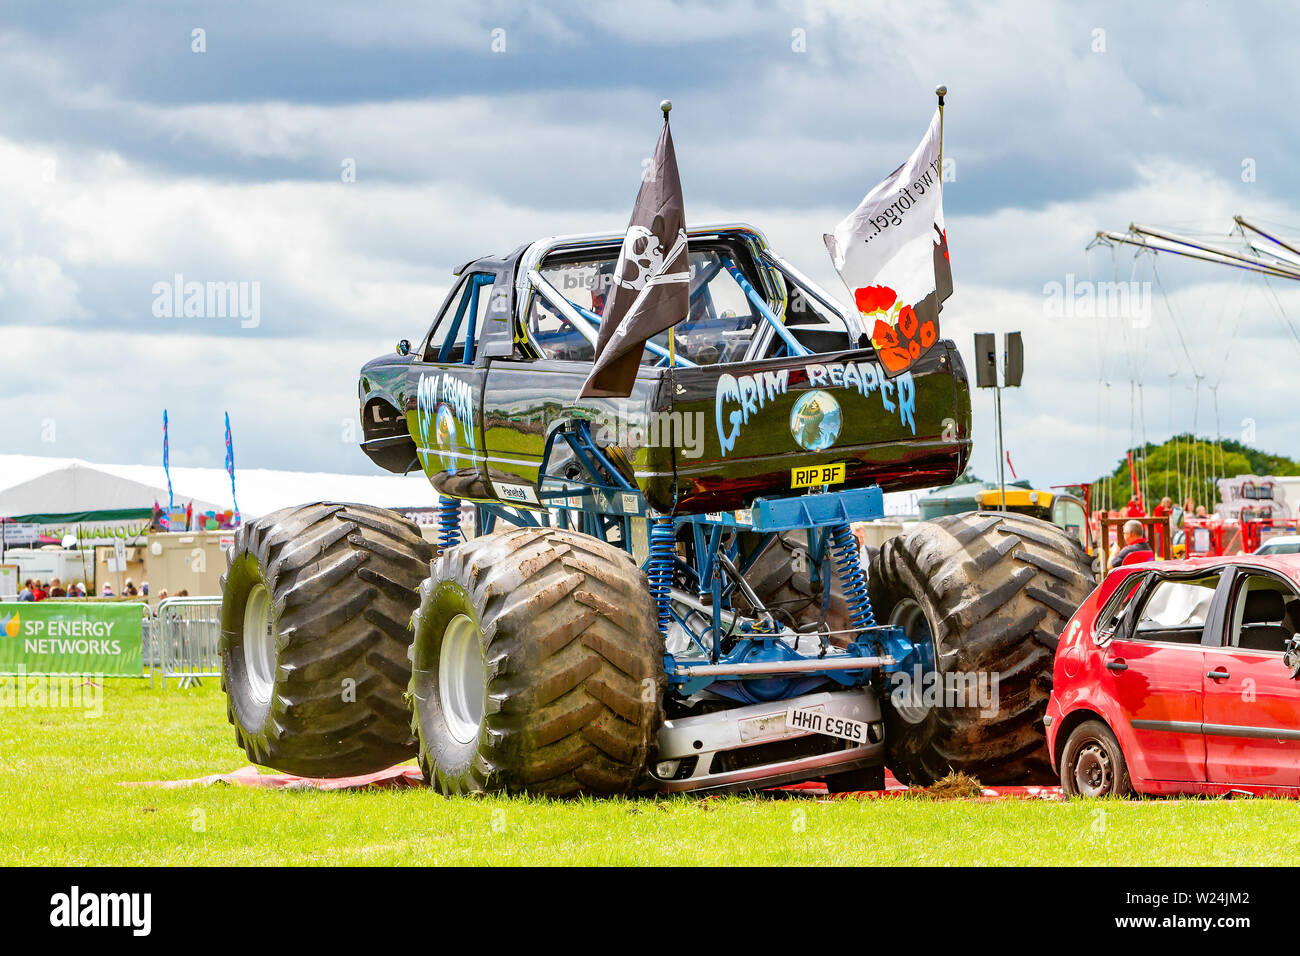 18 & 19 June 2019 - Royal Cheshire County Show - Big Pete and The Grim  Reaper monster trucks - The Grim Reaper gets stuck on a car Stock Photo -  Alamy